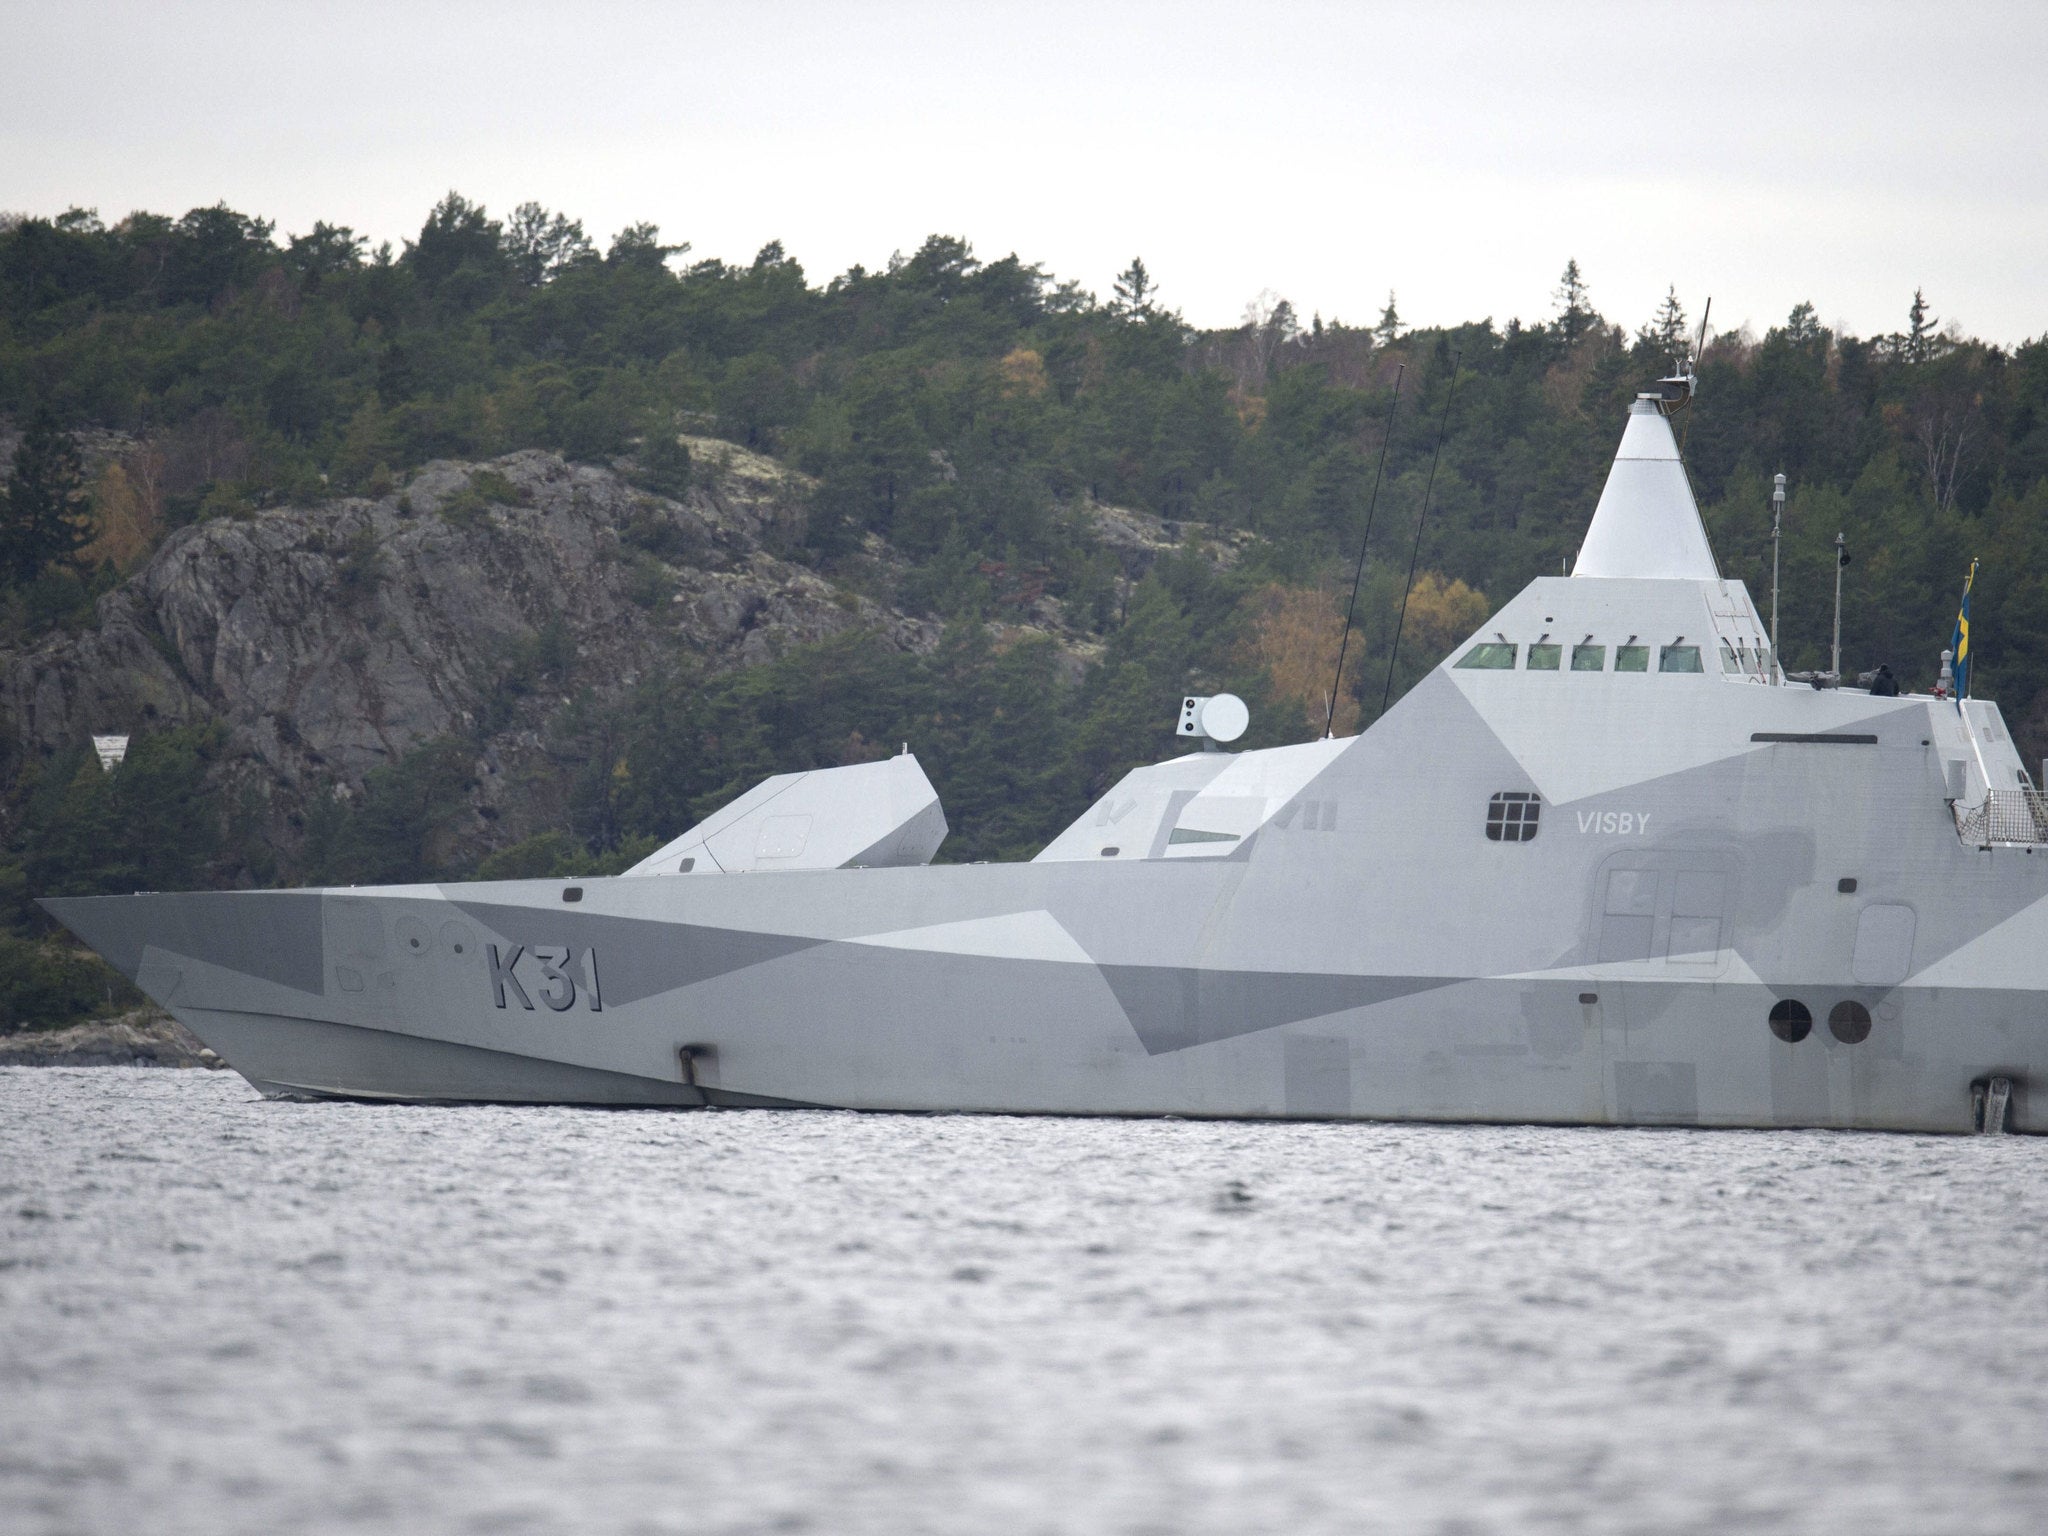 The Swedish HMS Visby patrols waters in the Stockholm archipelago during a hunt for a suspected Russian submarine in October 2014